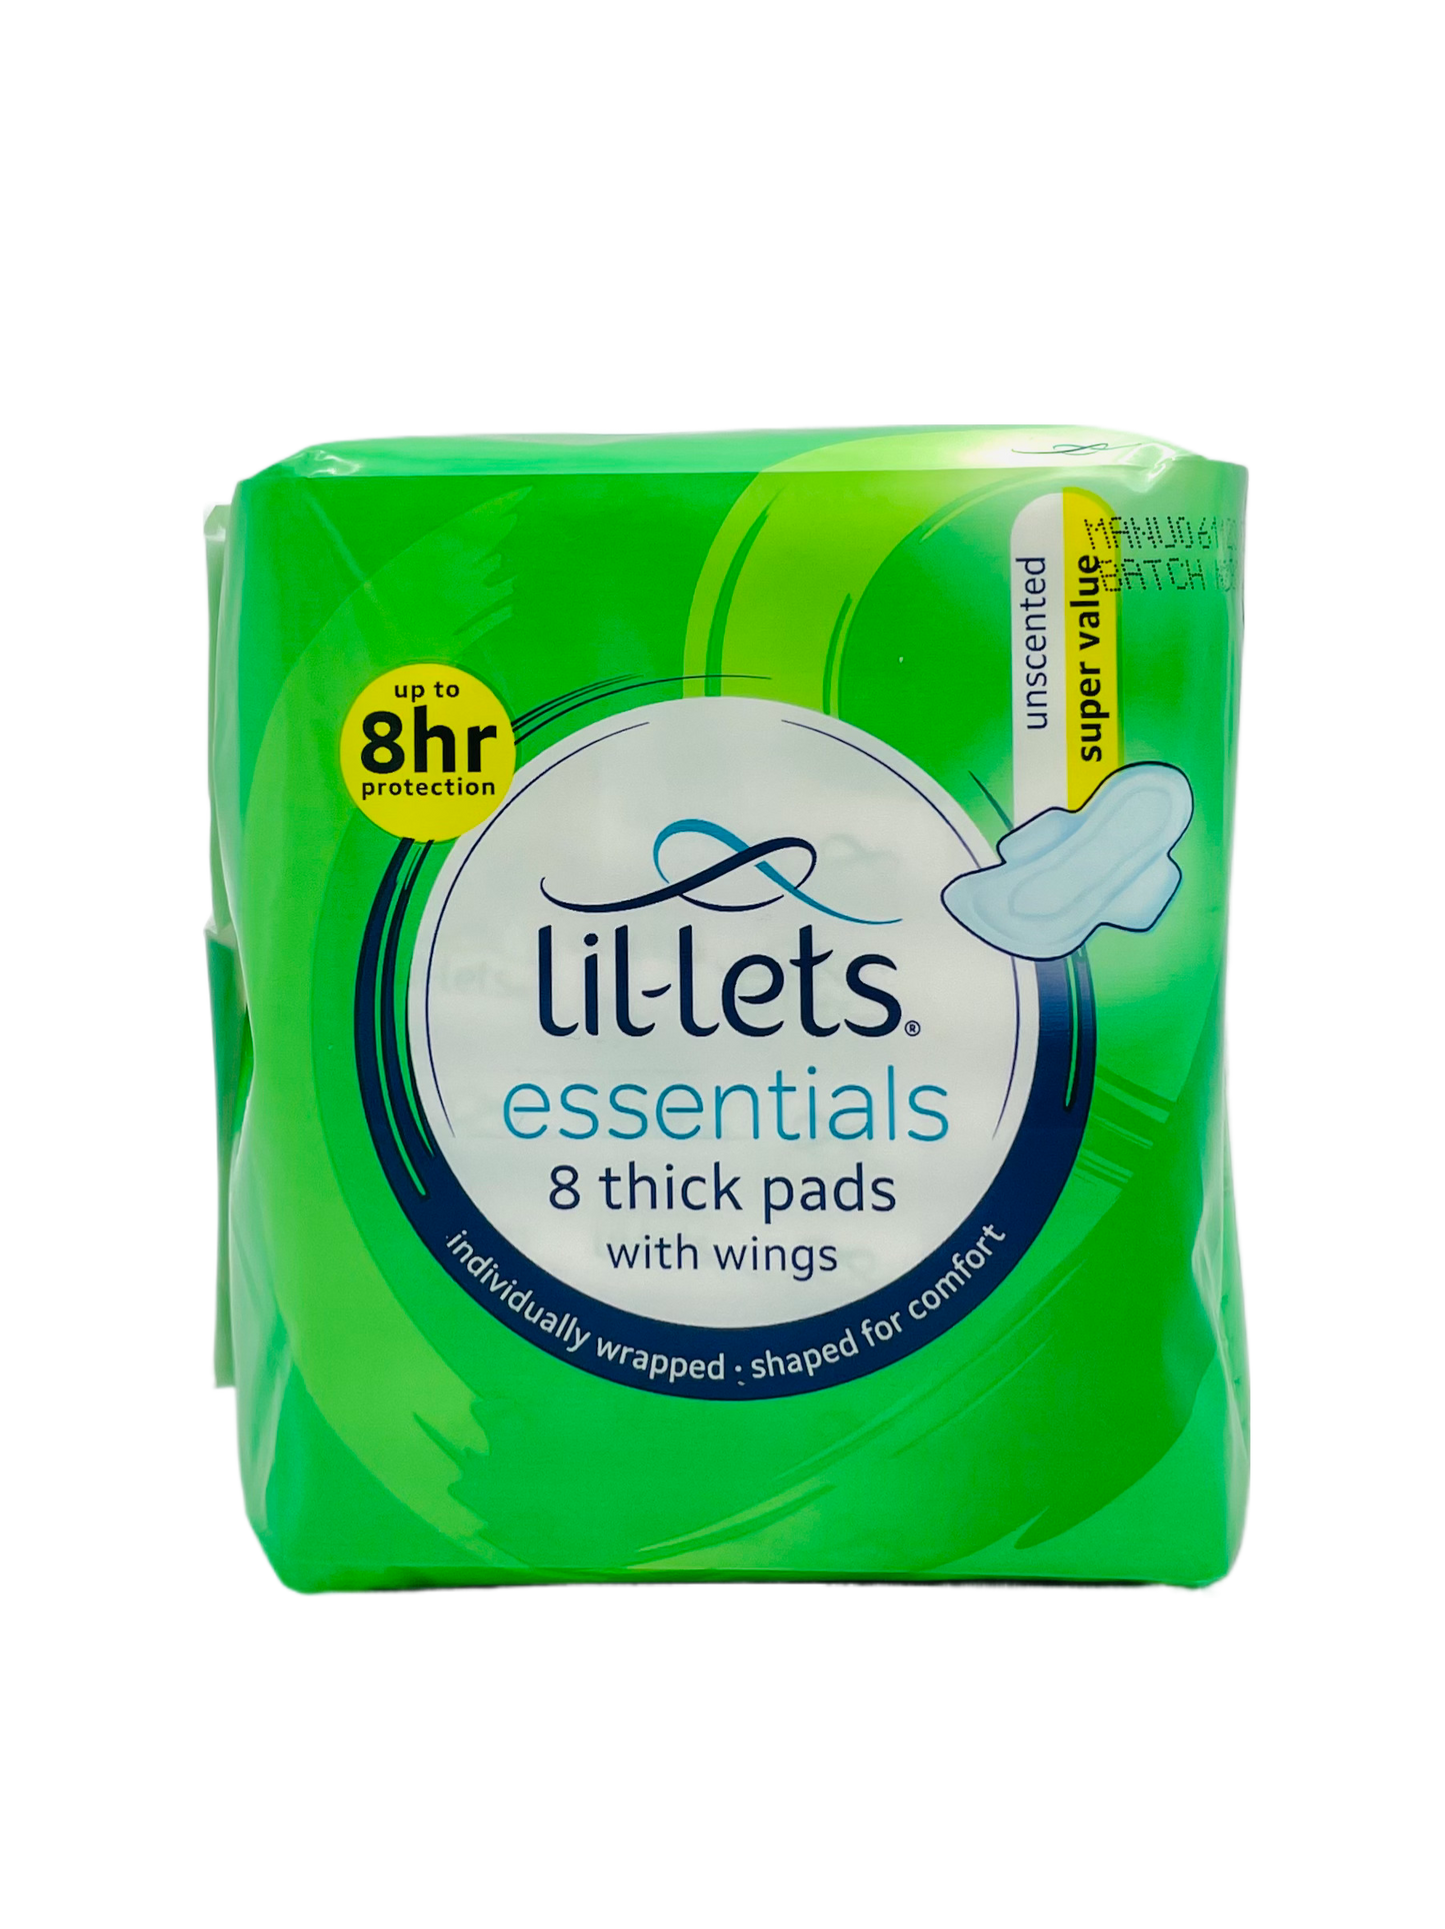 Lil-Lets Unscented essential 8 thick pads